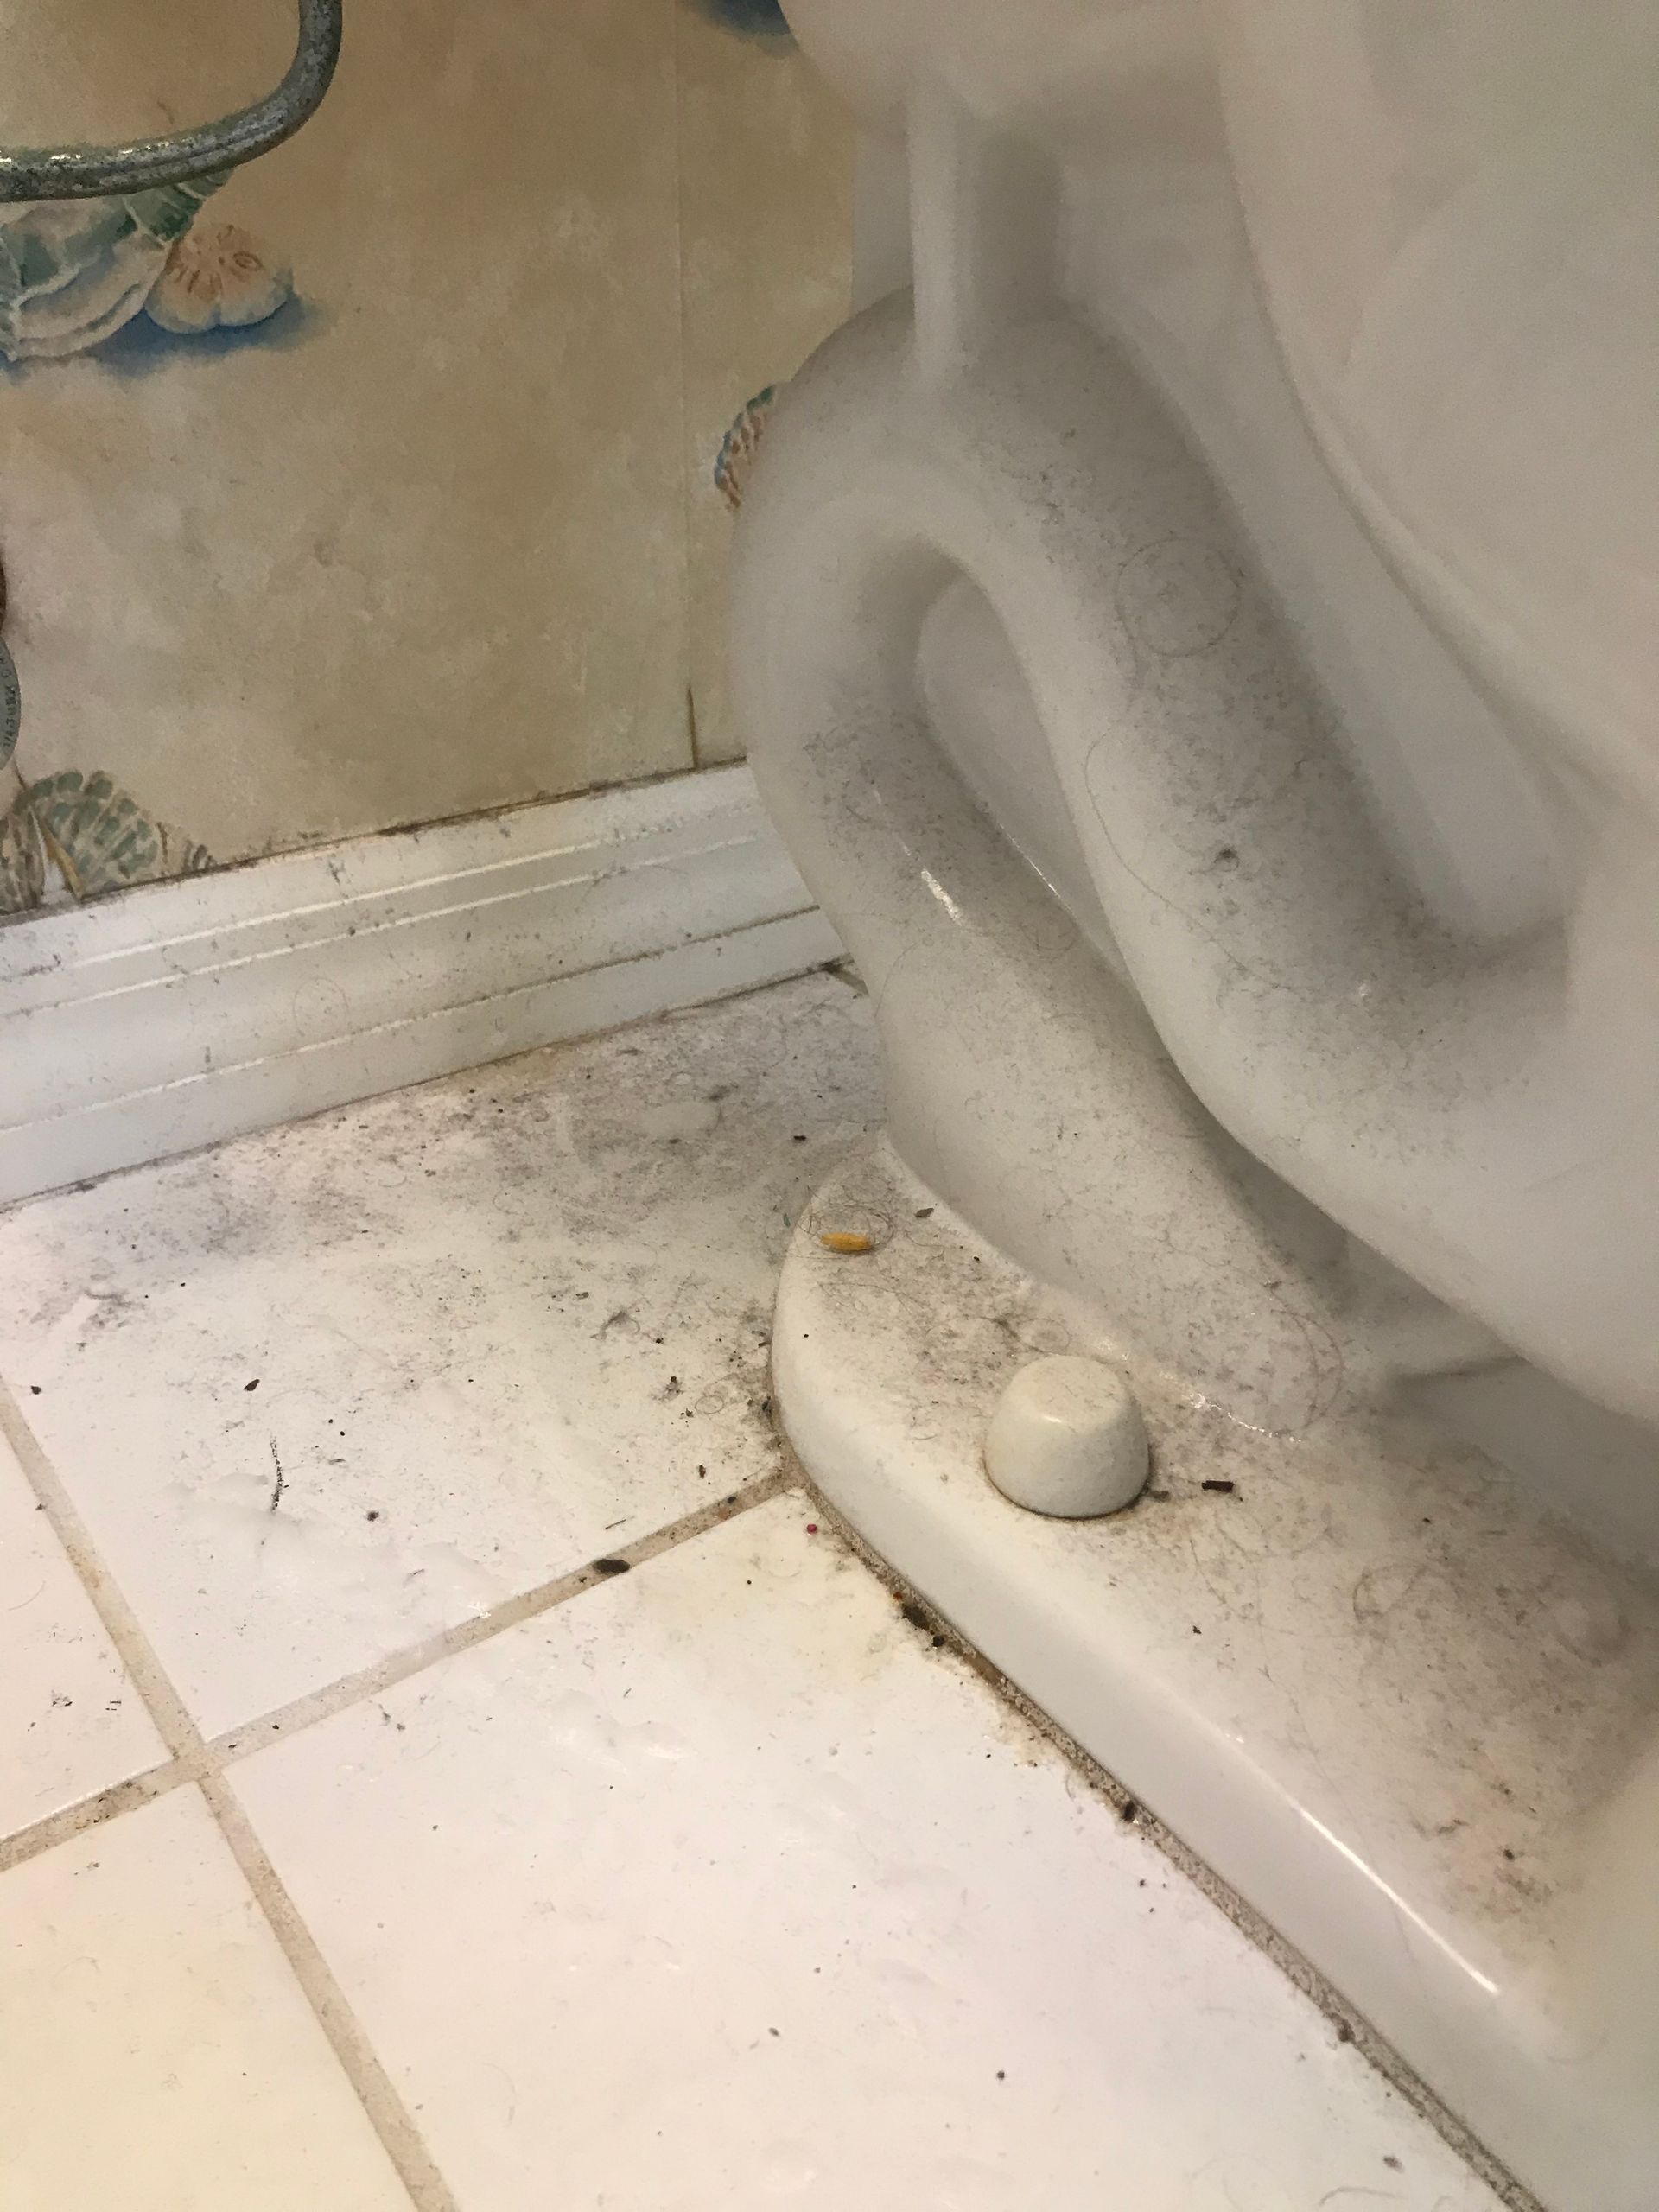 Dirty toilet | Lutz, FL | Our Clean Home